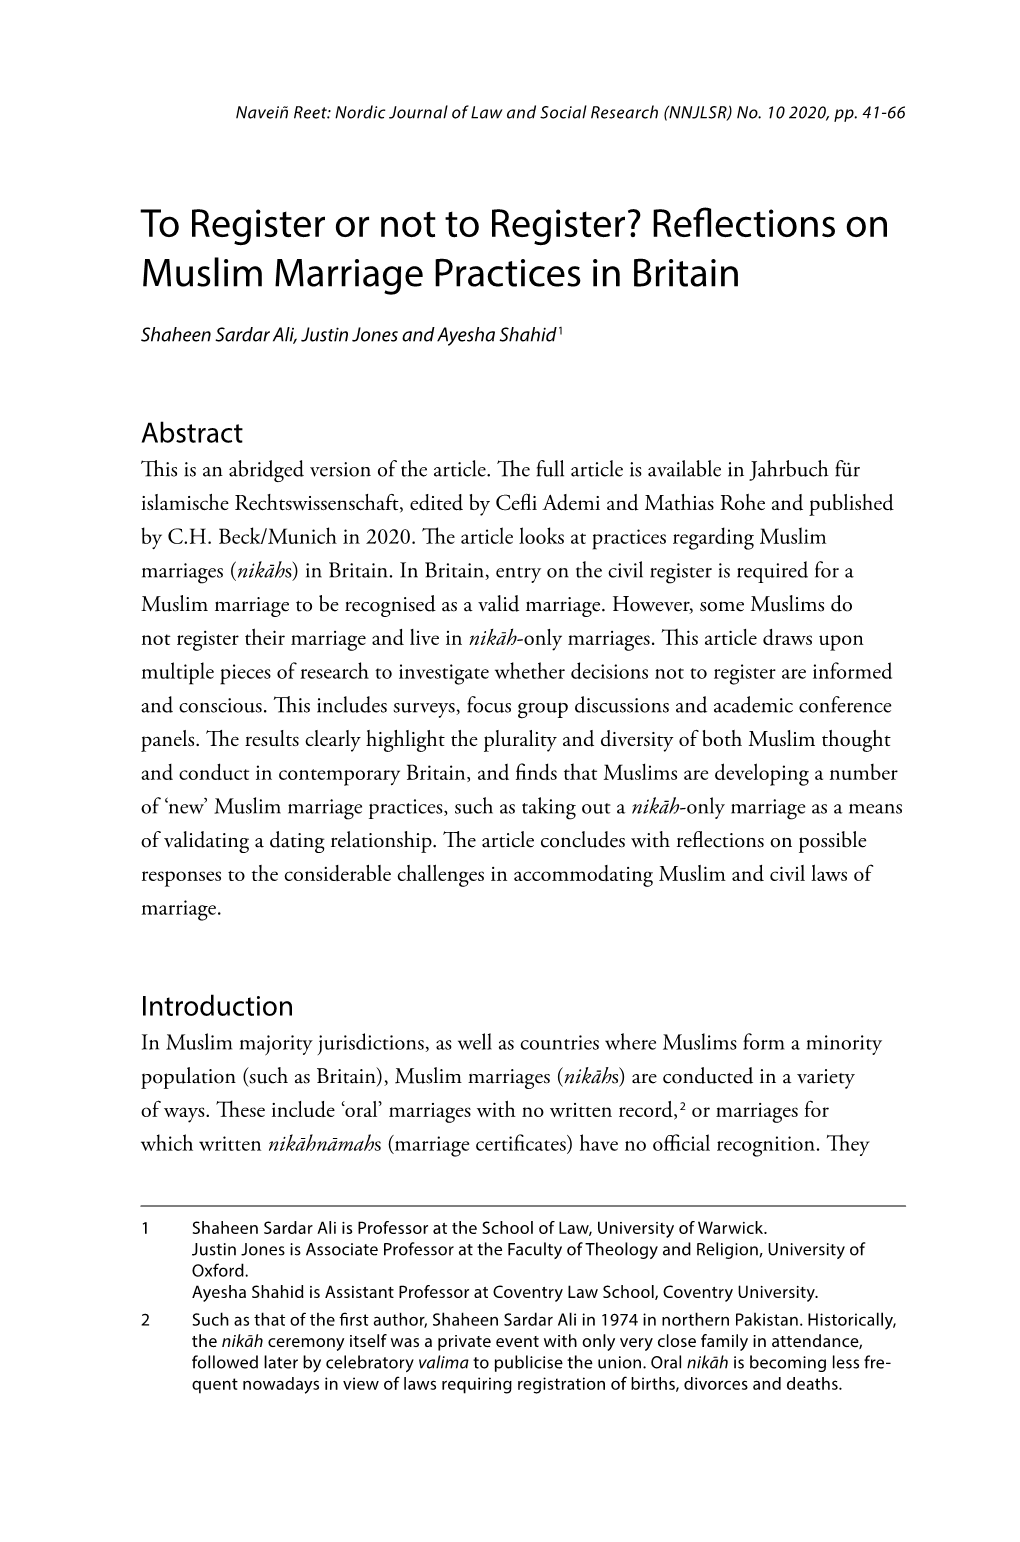 Reflections on Muslim Marriage Practices in Britain